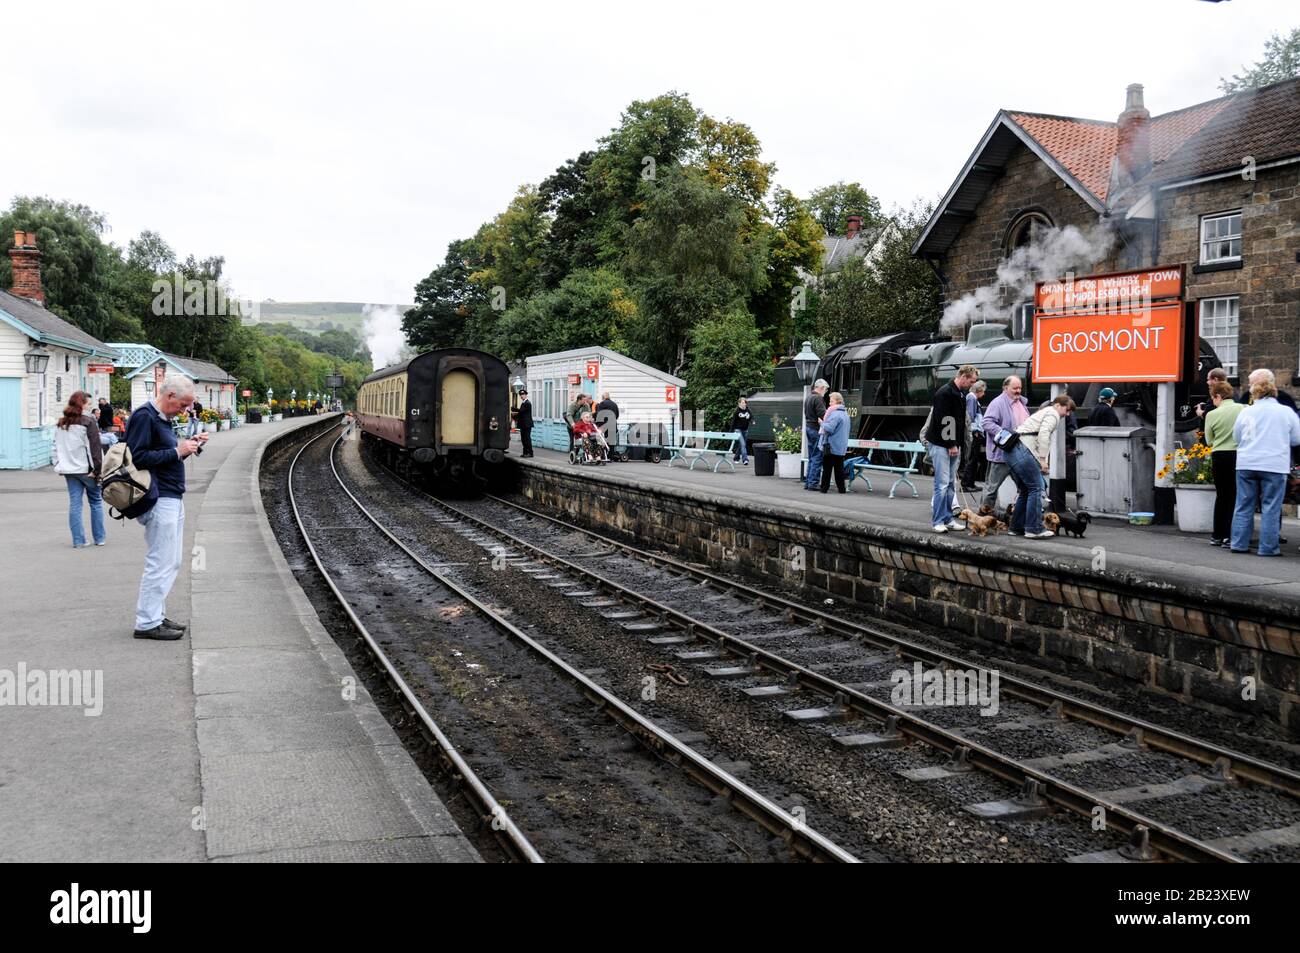 Tourists at Grosmont rail station on the NYMR (North Yorkshire Moors Railway) in North Yorkshire, Britain. Stock Photo